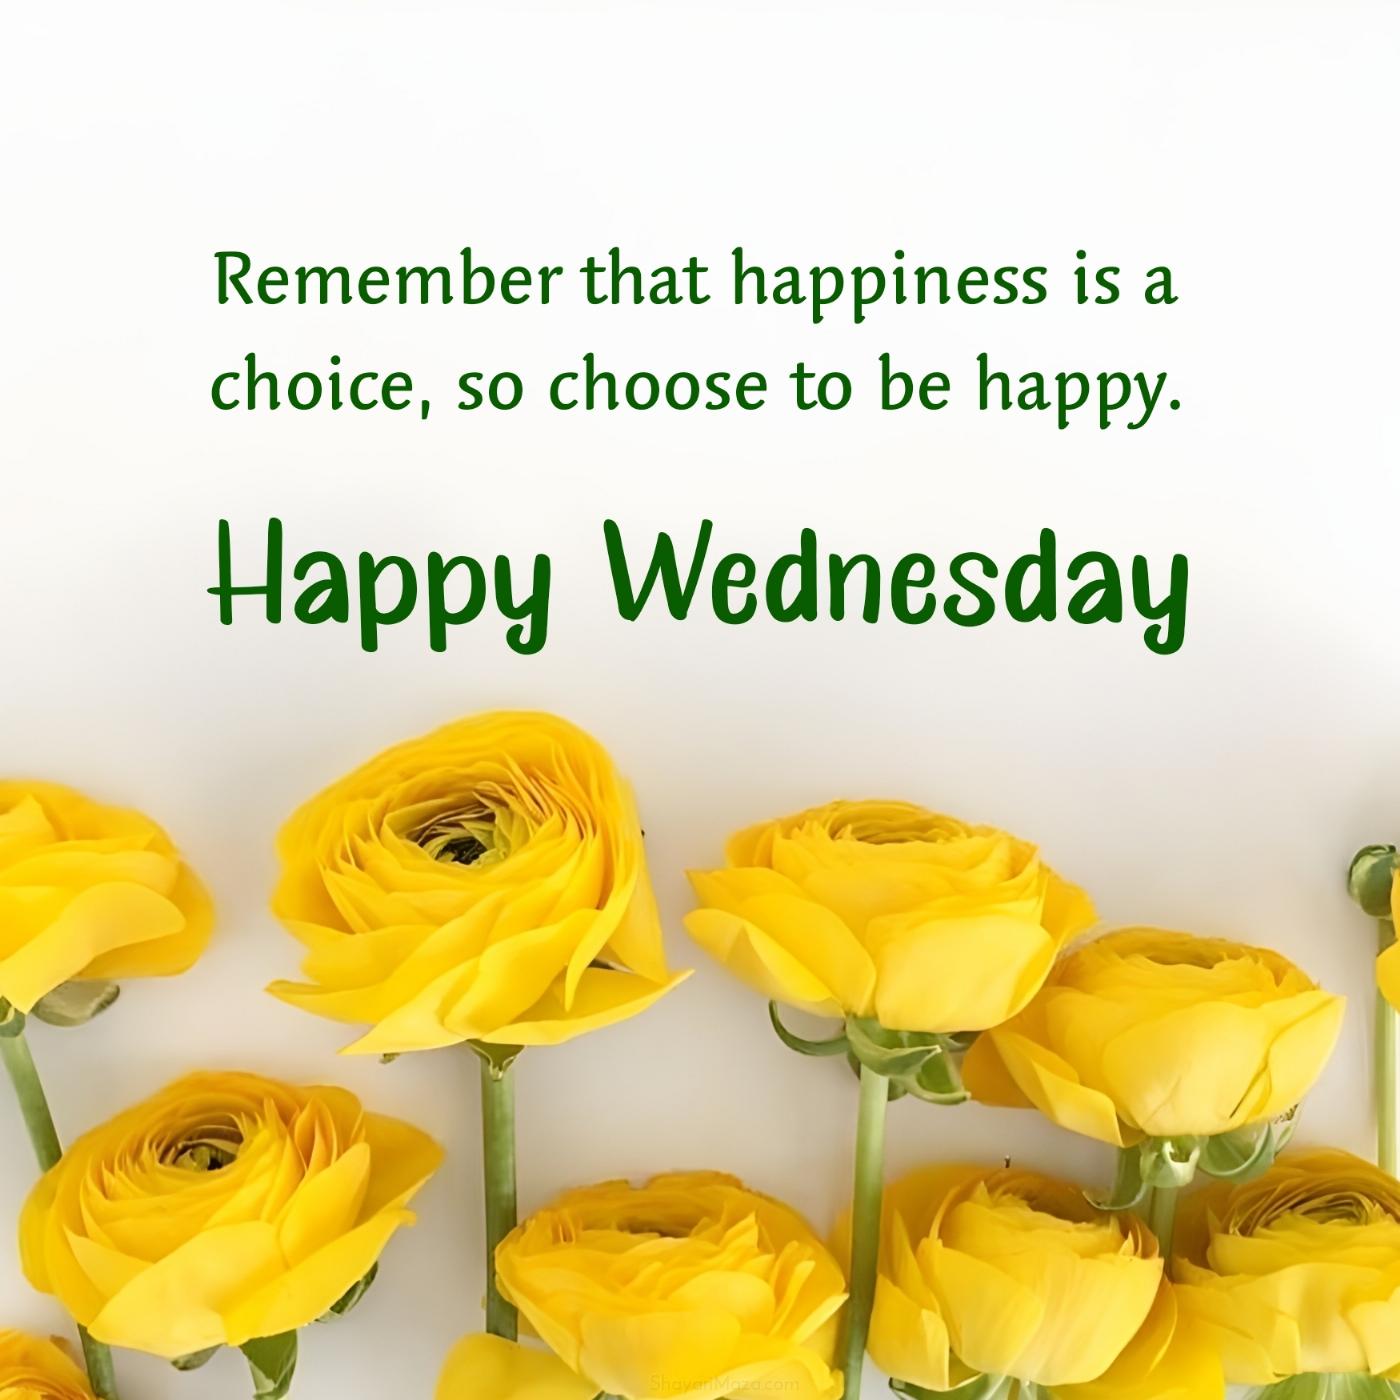 Happy Wednesday! Remember that happiness is a choice